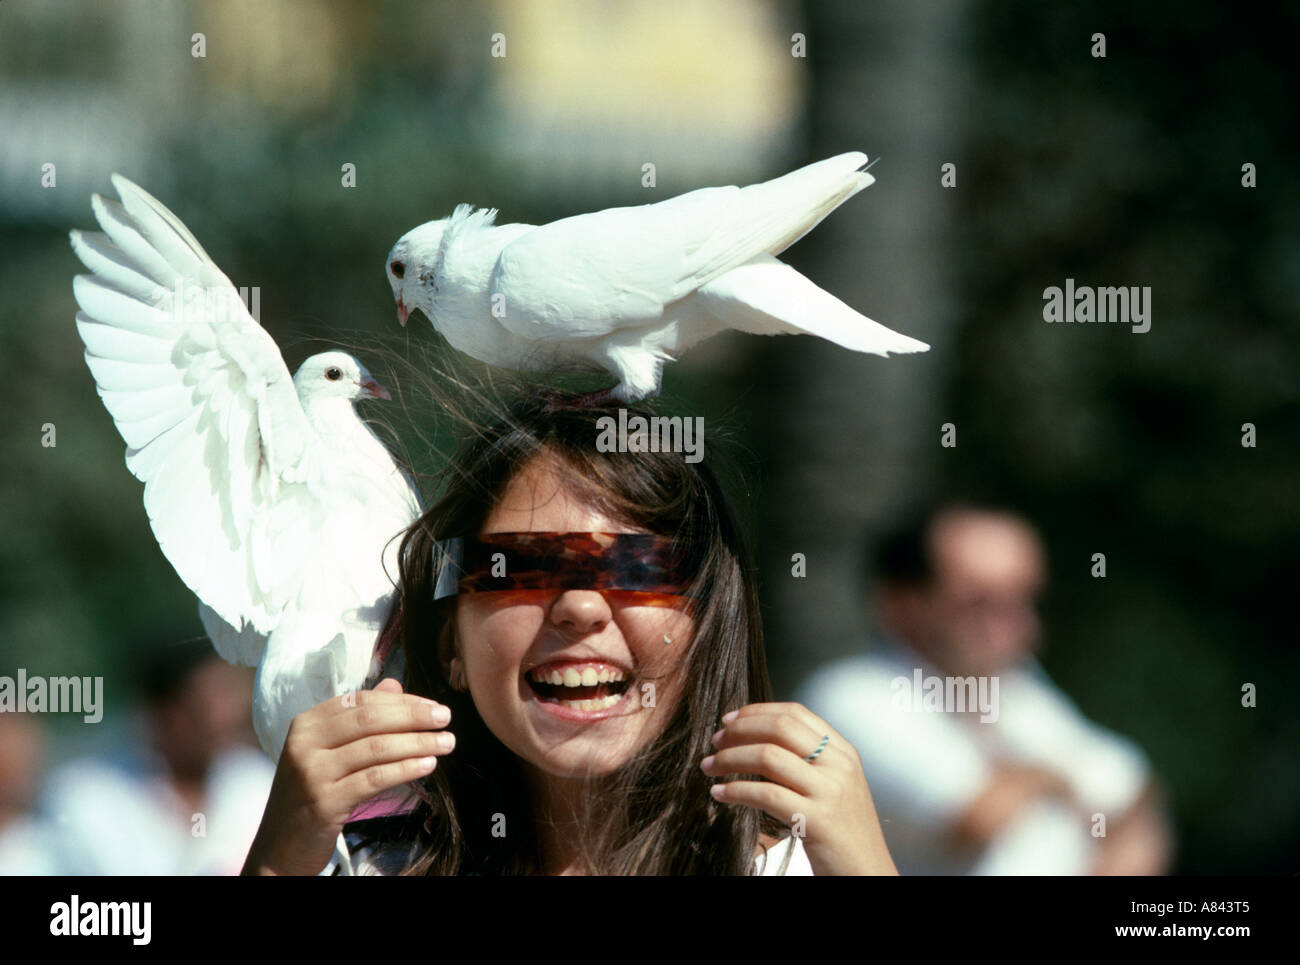 Spain. Andalusia. Seville. Young girl enjoying scary fun with the famous white pigeons of Seville. Stock Photo